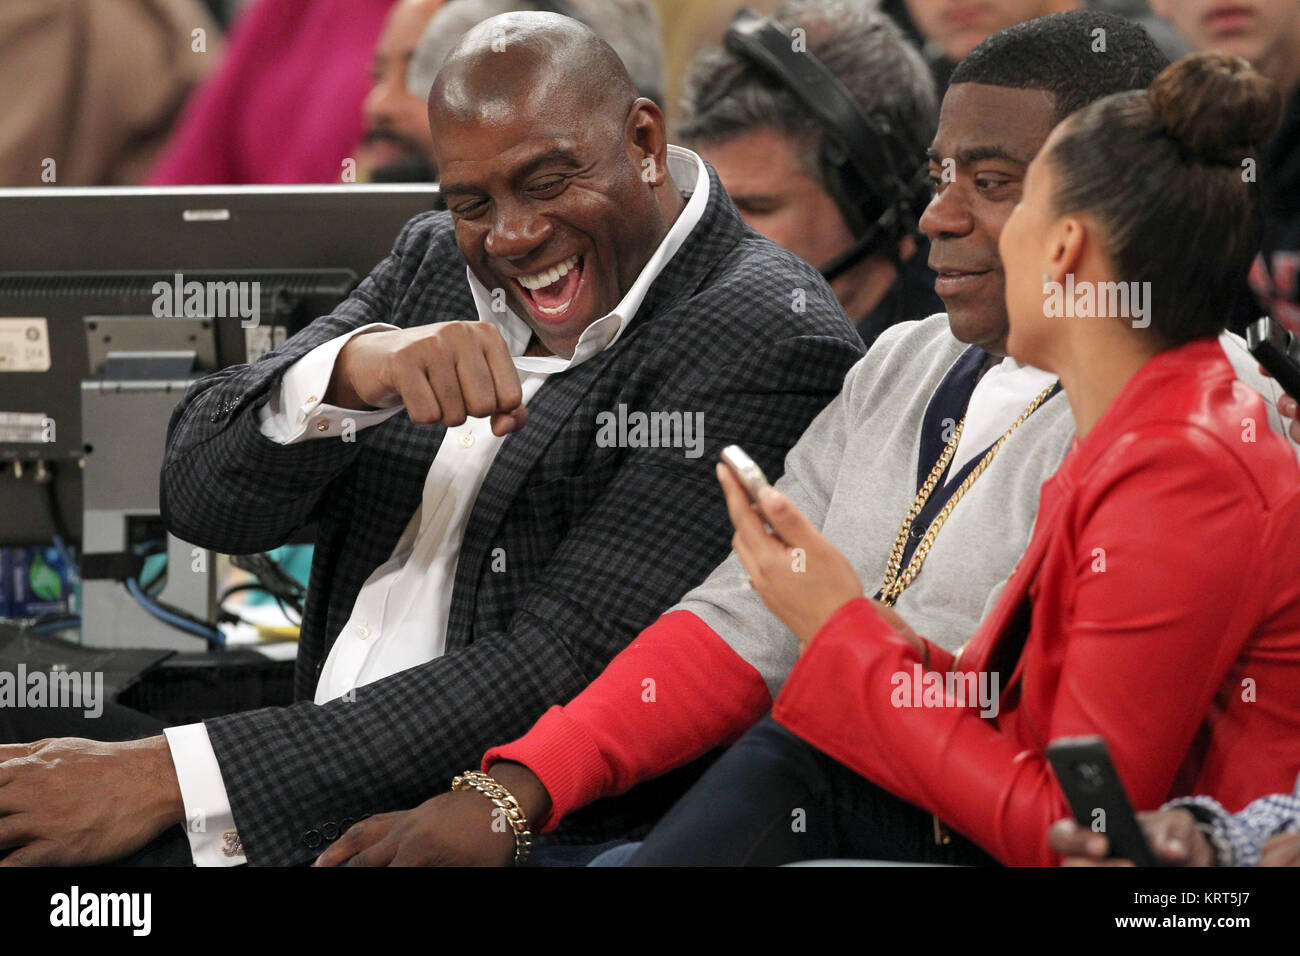 NEW YORK, NY - NOVEMBER 08: (Embargoed till November 10, 2015) Magic Johnson, Tracy Morgan with wife Megan Wollover sit with Michael K. Williams and  Director Spike Lee at the New York Knicks vs Los Angeles Lakers game at Madison Square Garden on November 8, 2015 in New York City.   People:  Magic Johnson, Tracy Morgan, Megan Wollover Stock Photo